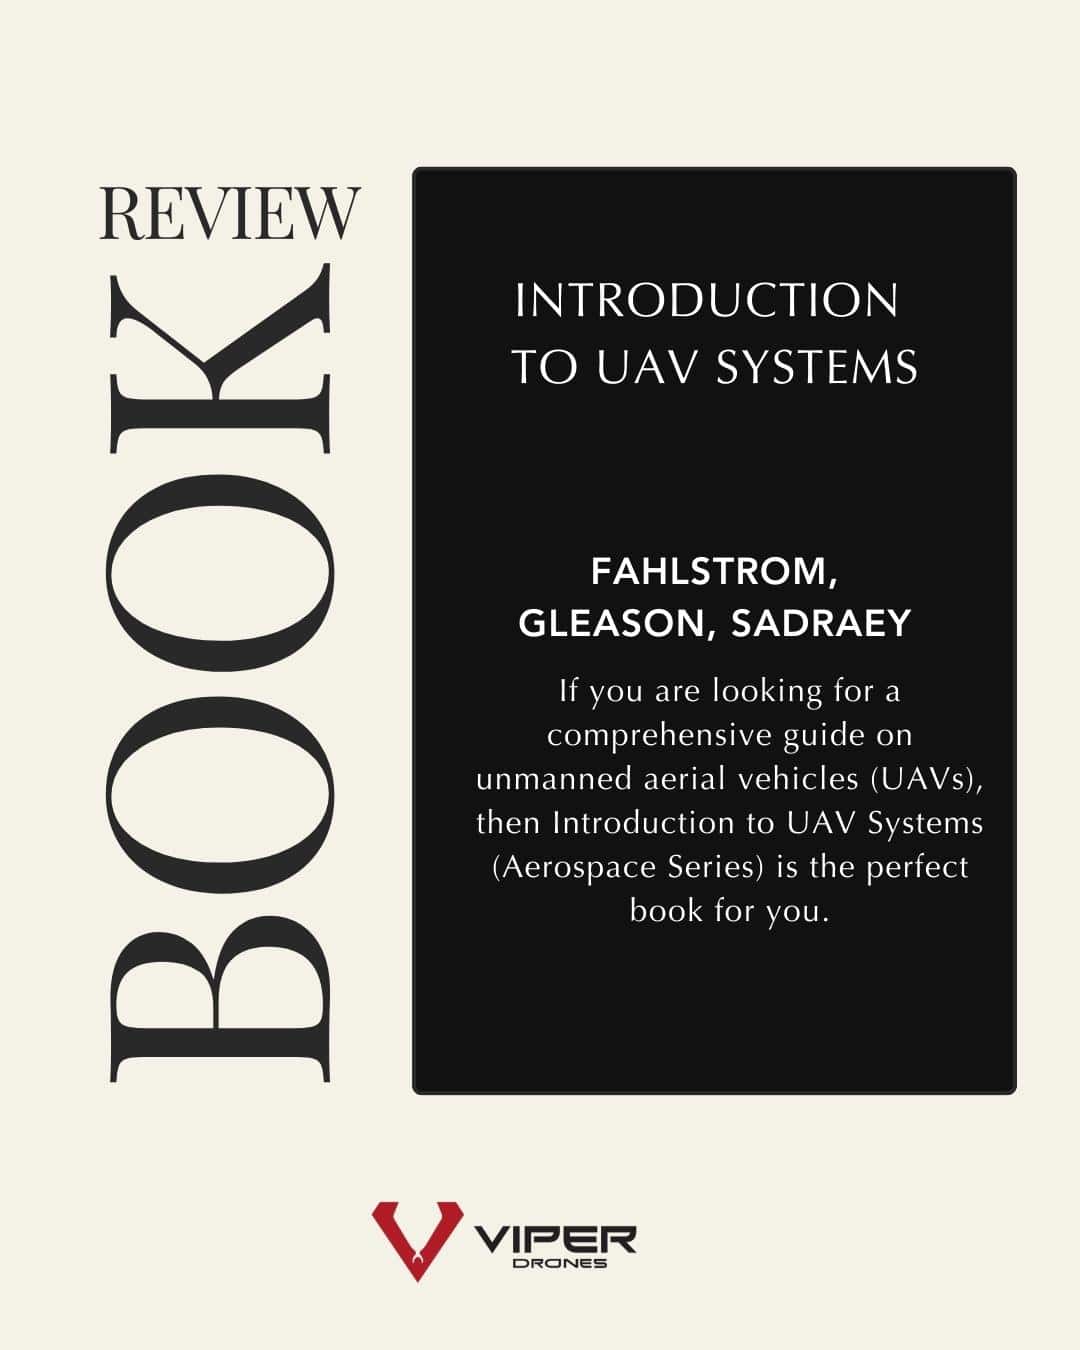 introduction to uav systems book review text